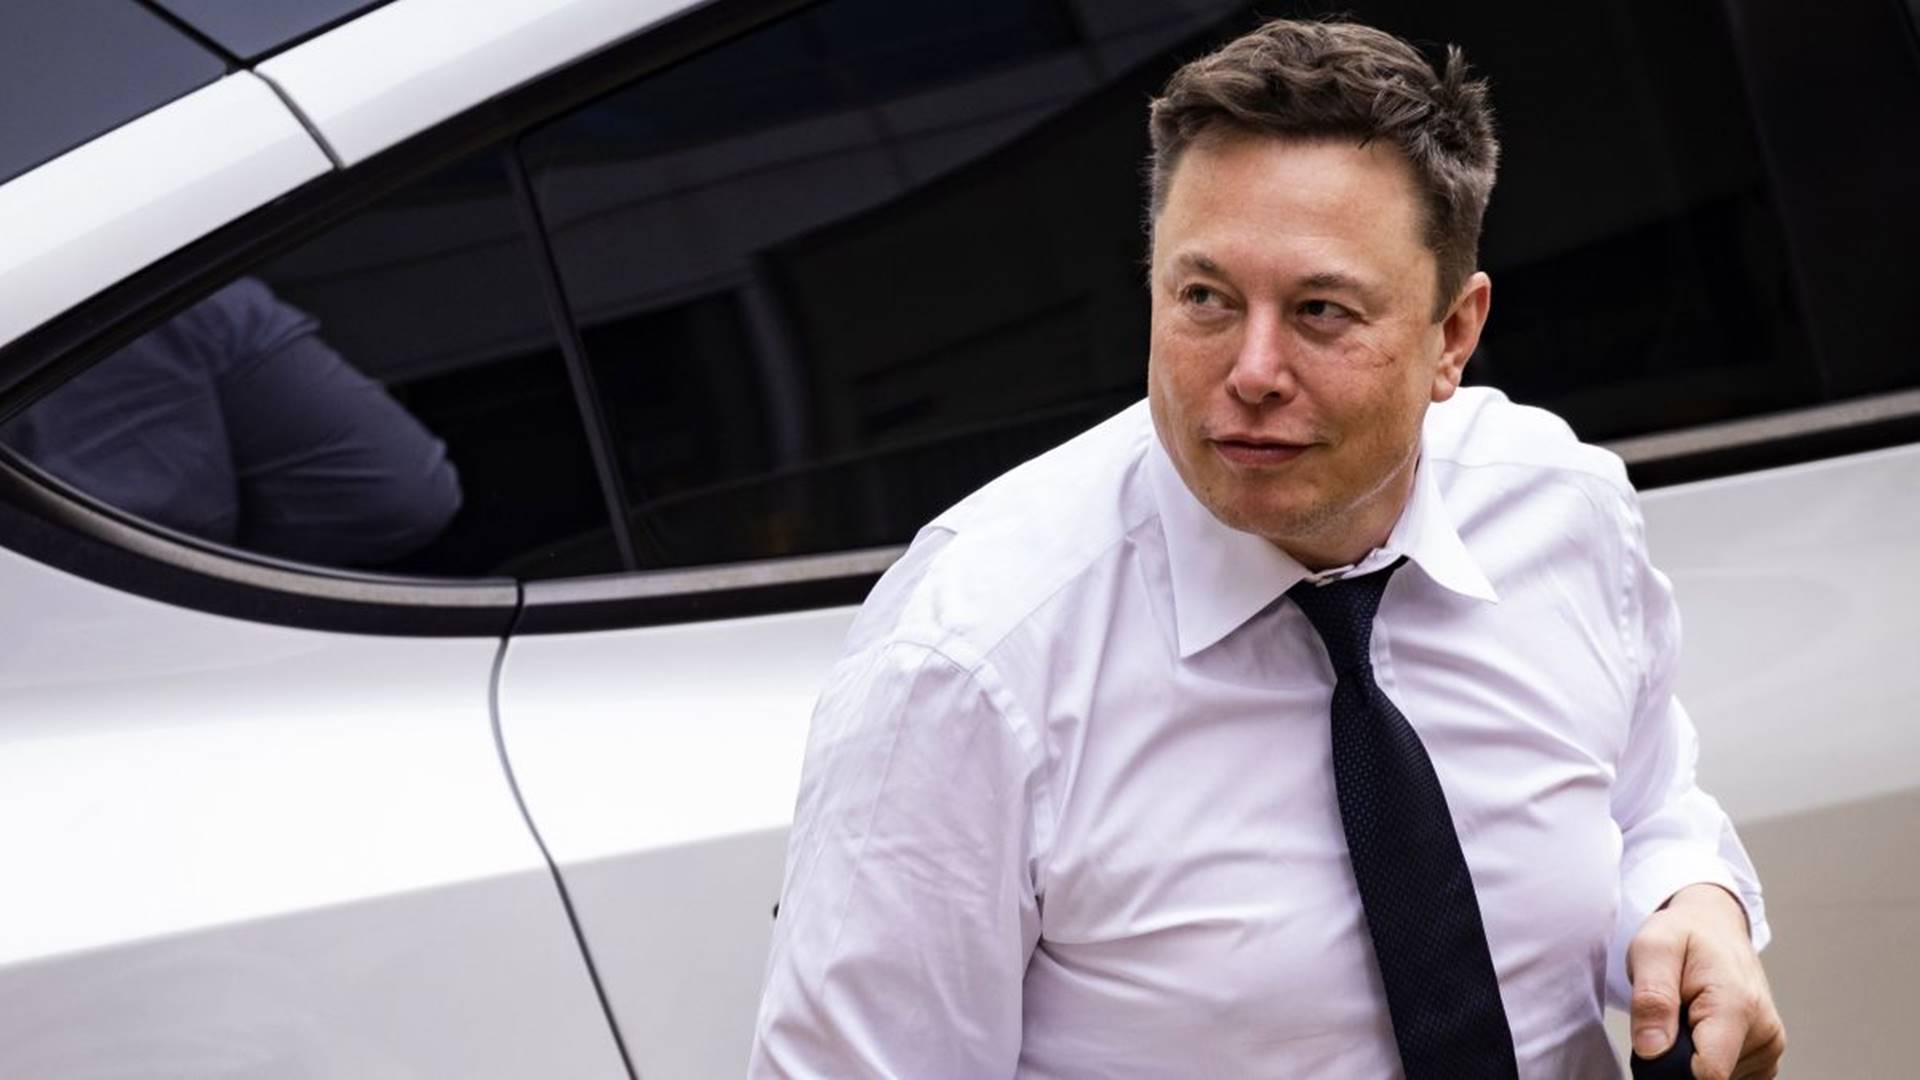 Tesla CEO Elon Musk give a miss to the quarterly ritual of talking to Wall Street